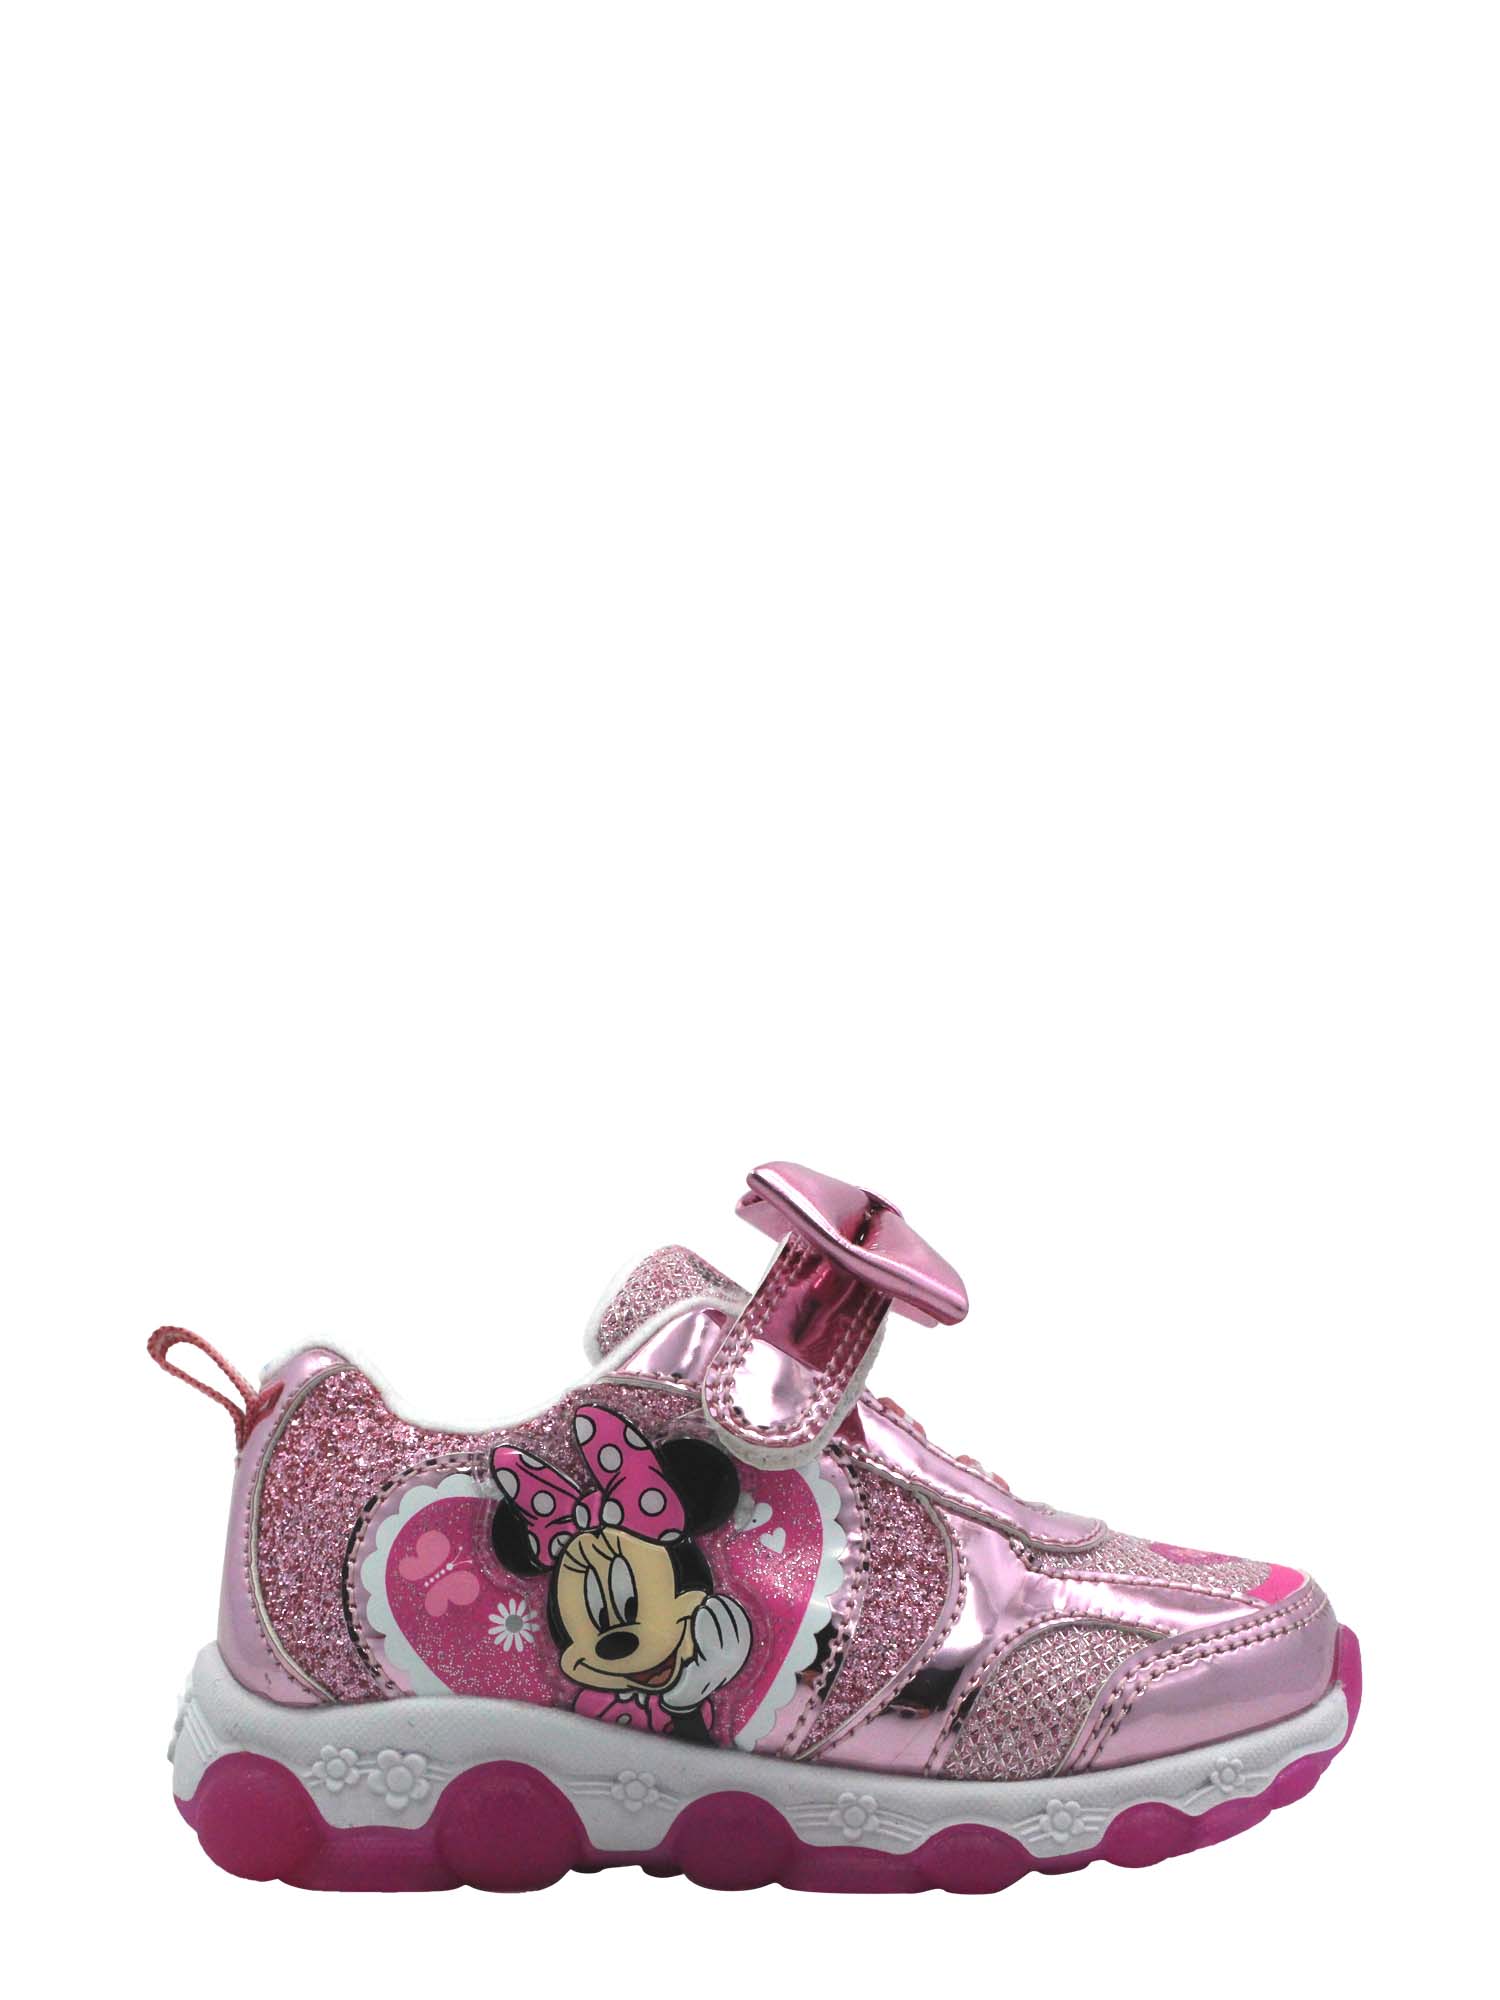 Minnie Mouse athletic - image 5 of 5